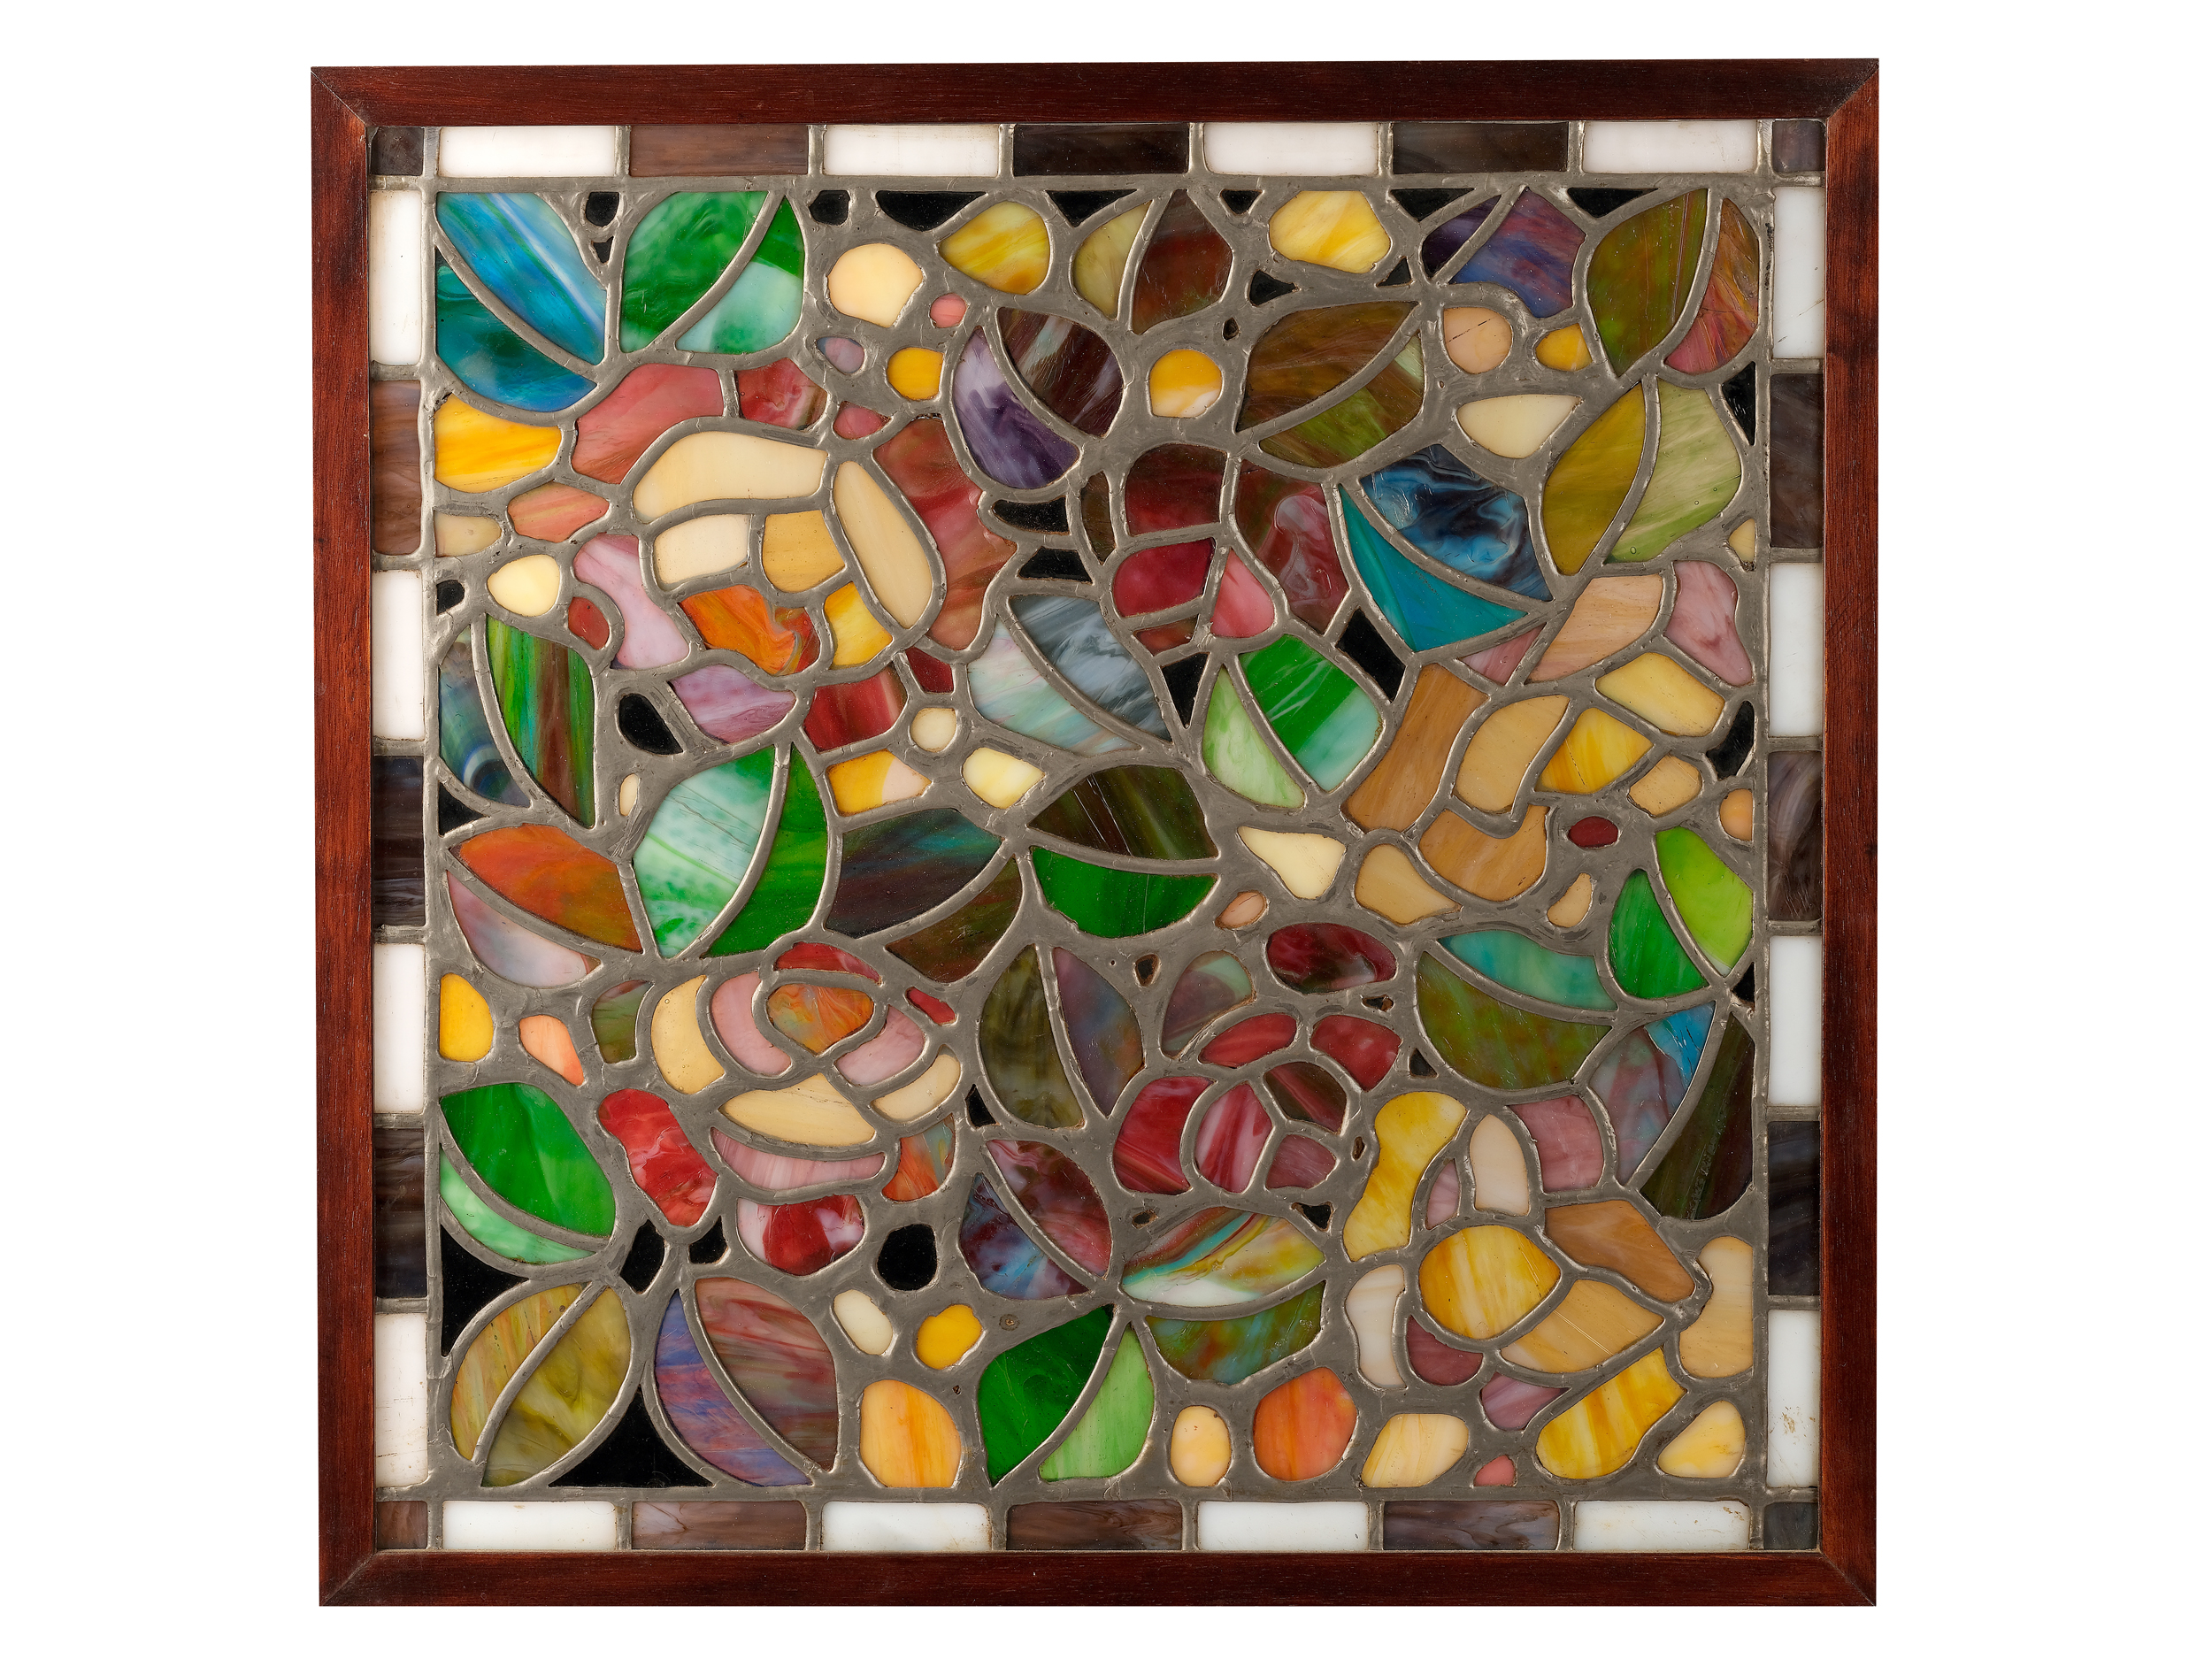 Art Nouveau window, Around 1900/20, Colorful leaded glass in wooden frame